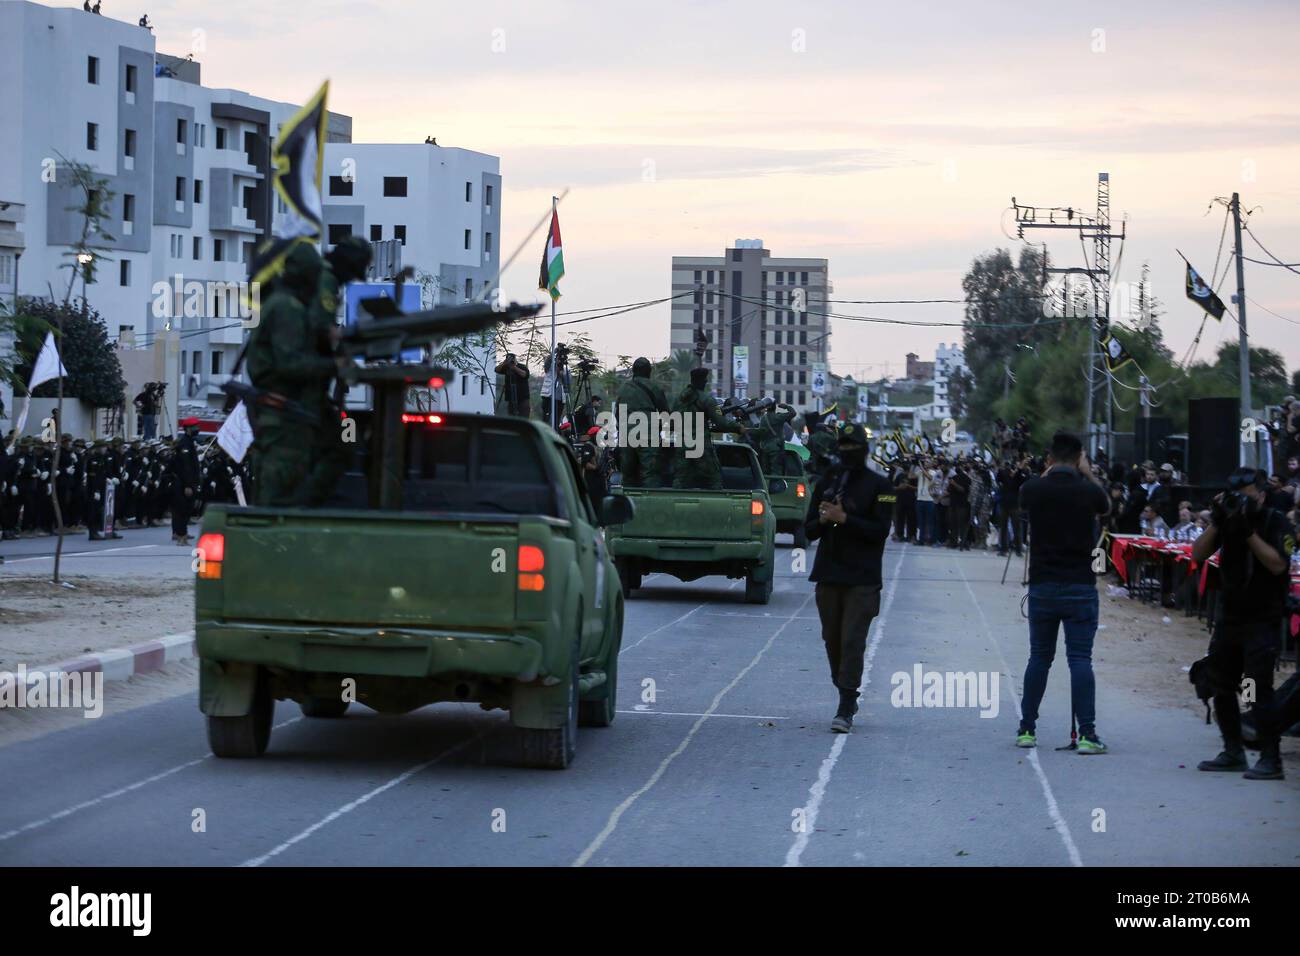 Members of the Al-Quds Brigades, the military wing of the Islamic Jihad movement, participate in an anti-Israel military parade on the occasion of the 36th anniversary of the founding of the movement in Gaza City. Stock Photo